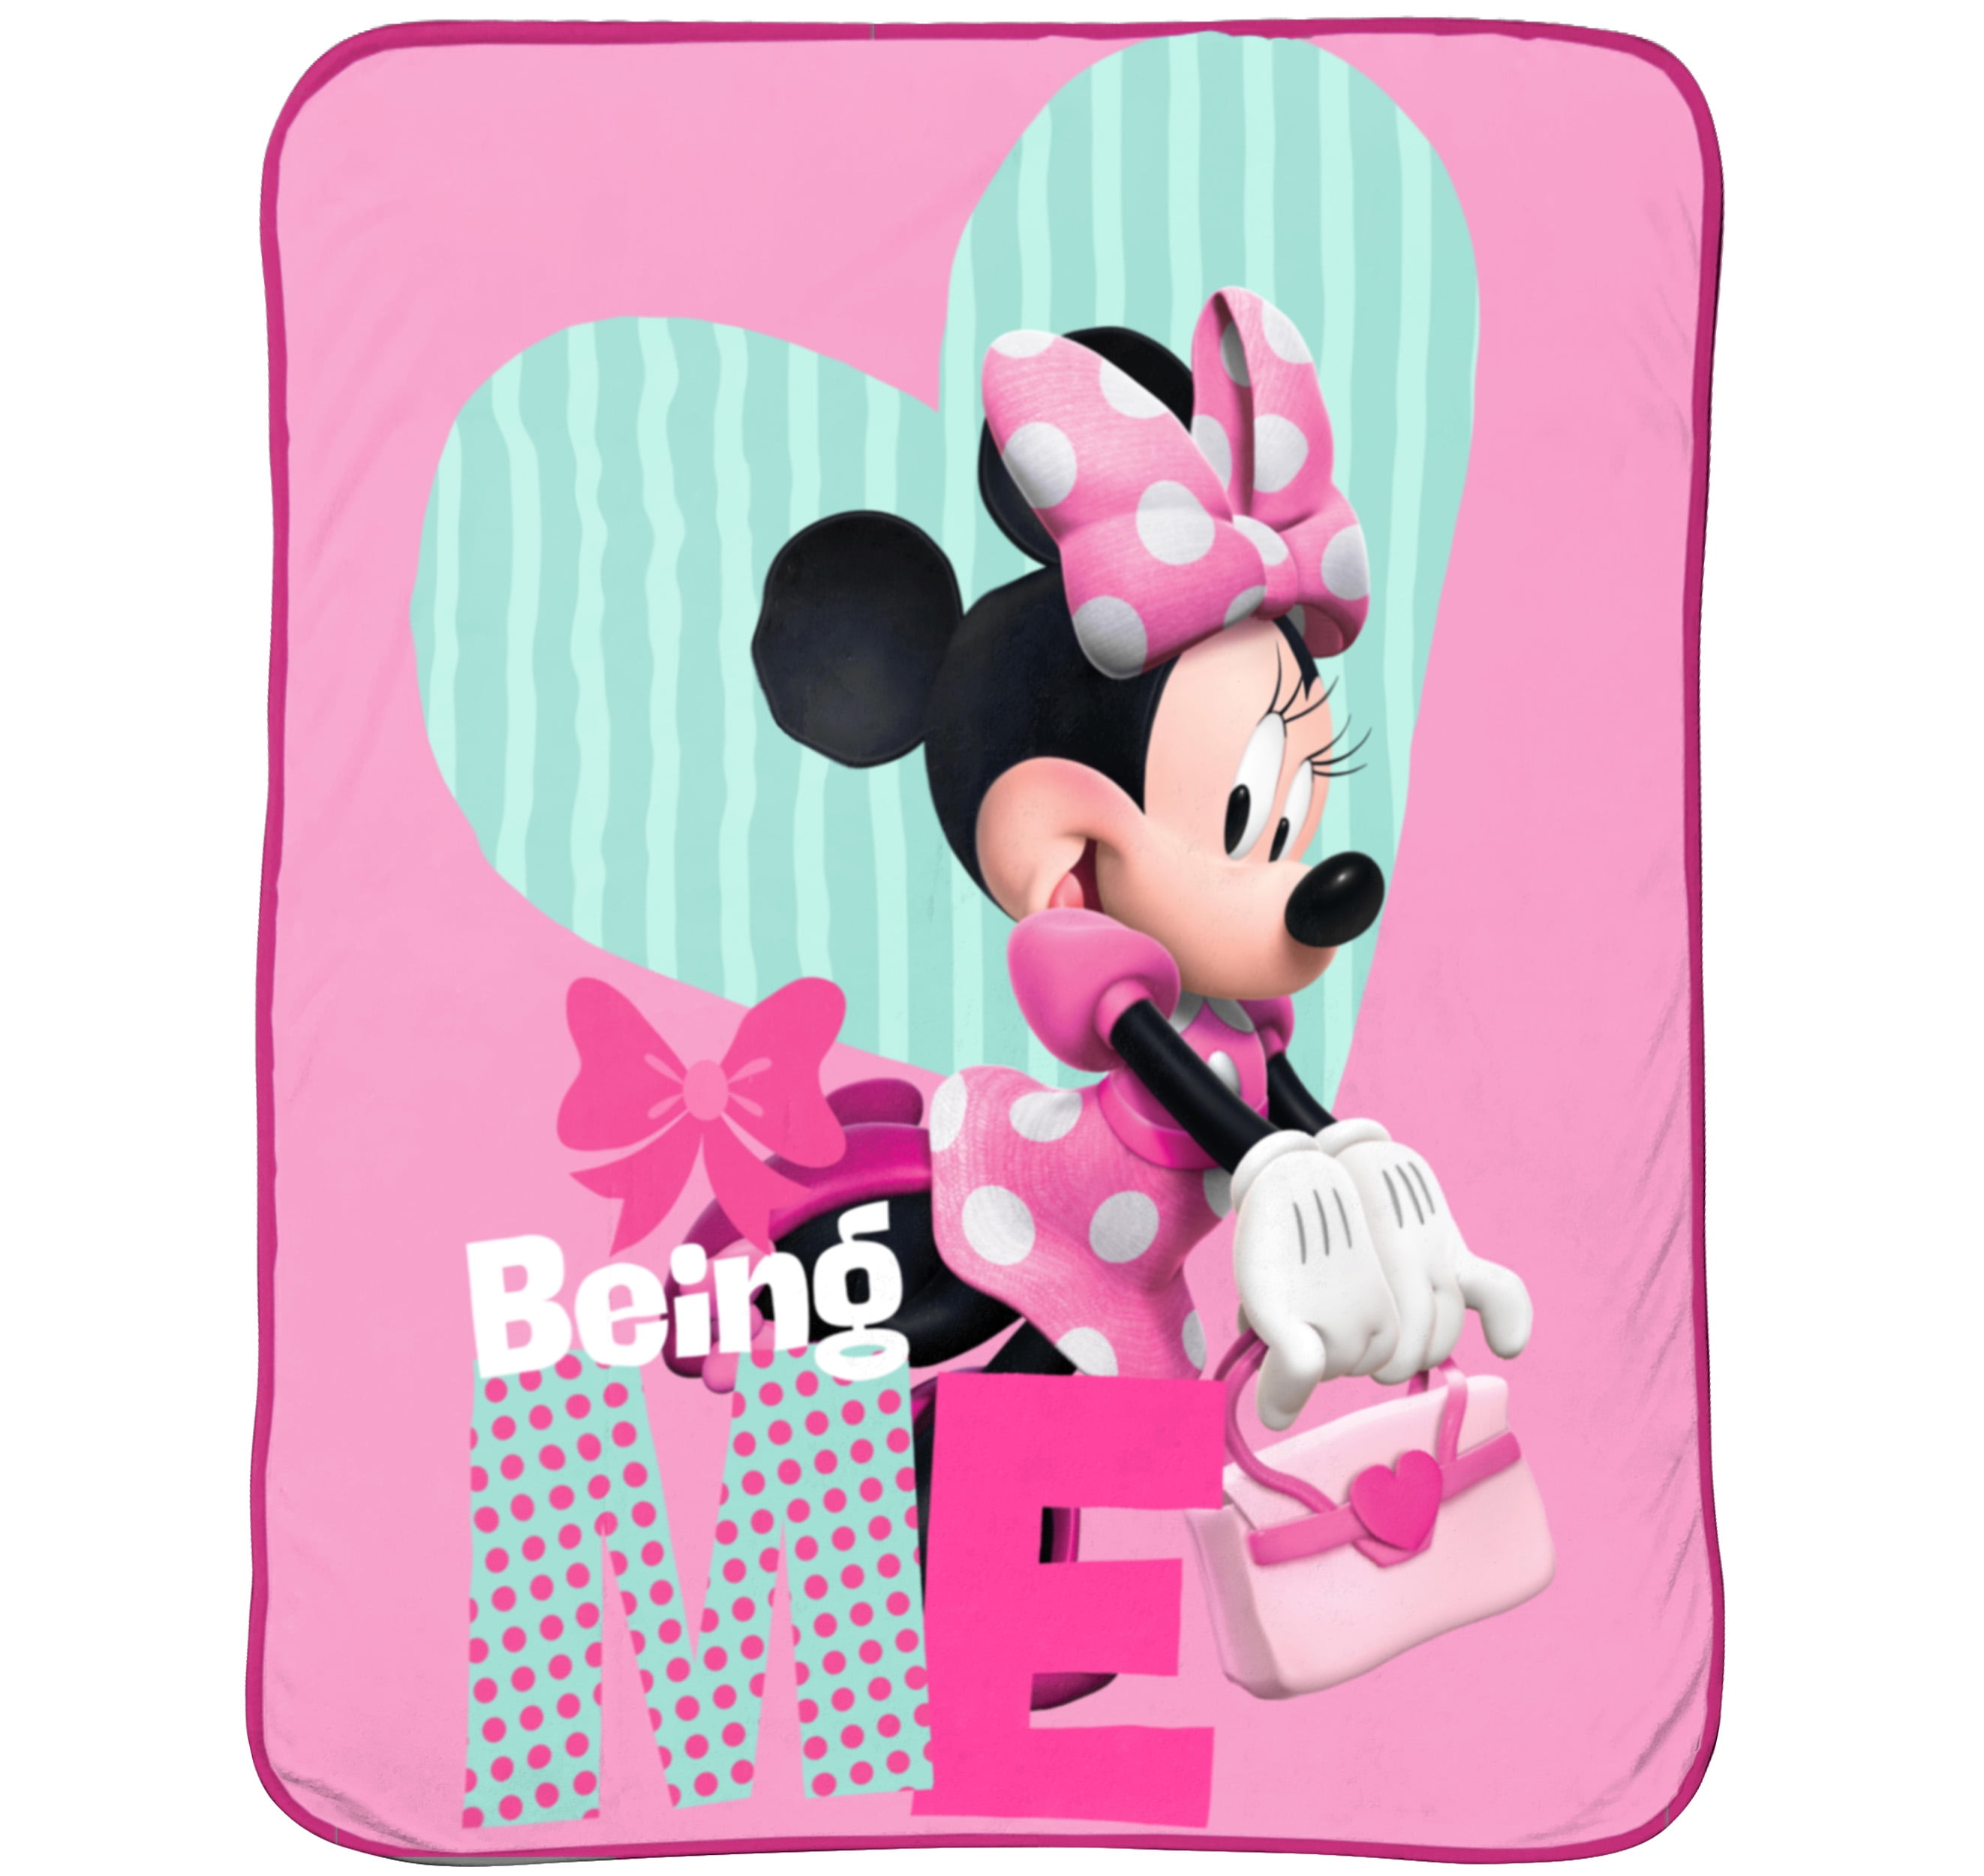 Blanket Minnie Mouse Hot Sale, 56% OFF | www.velocityusa.com